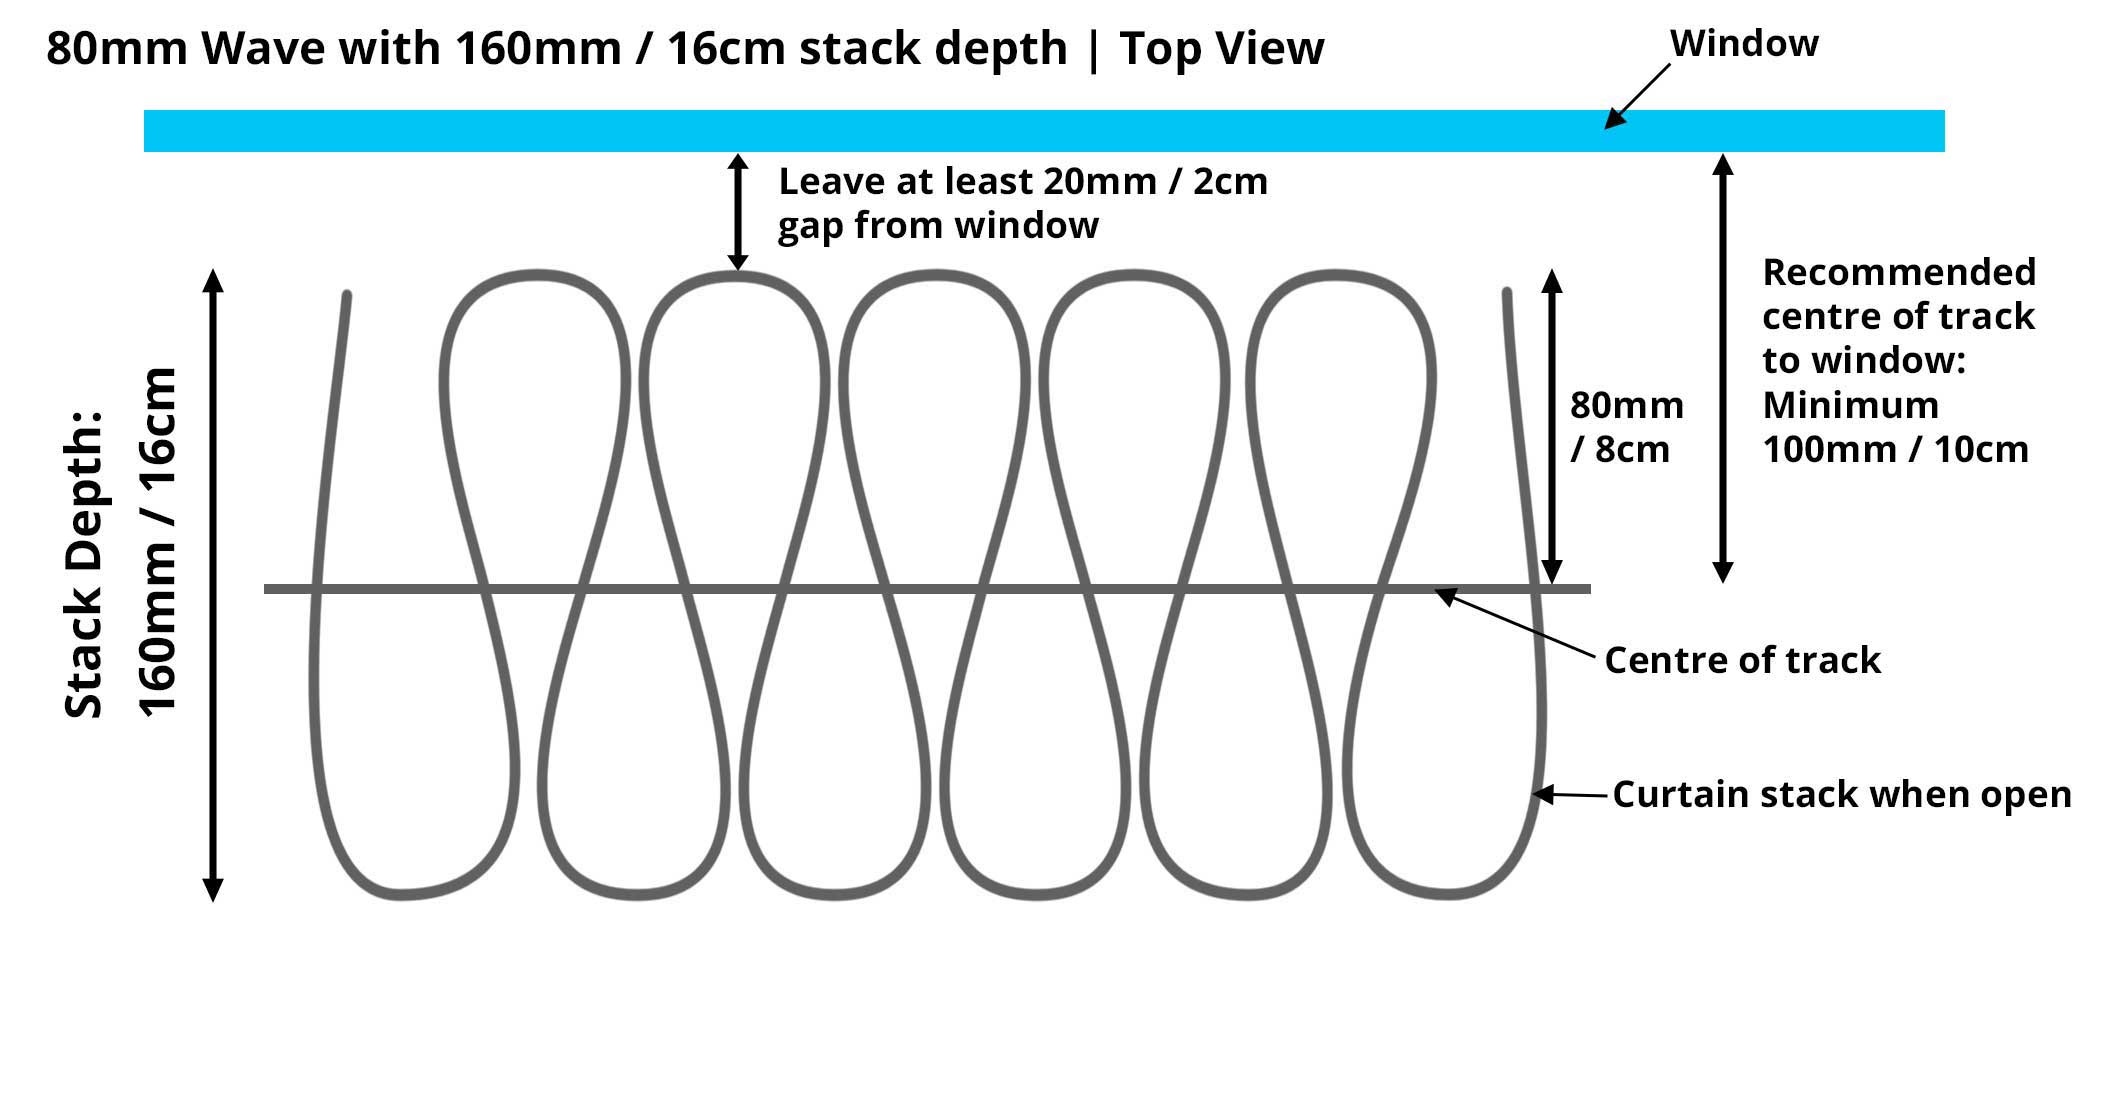 An image explaining the 160mm stack depth on a 80mm Wave curtain